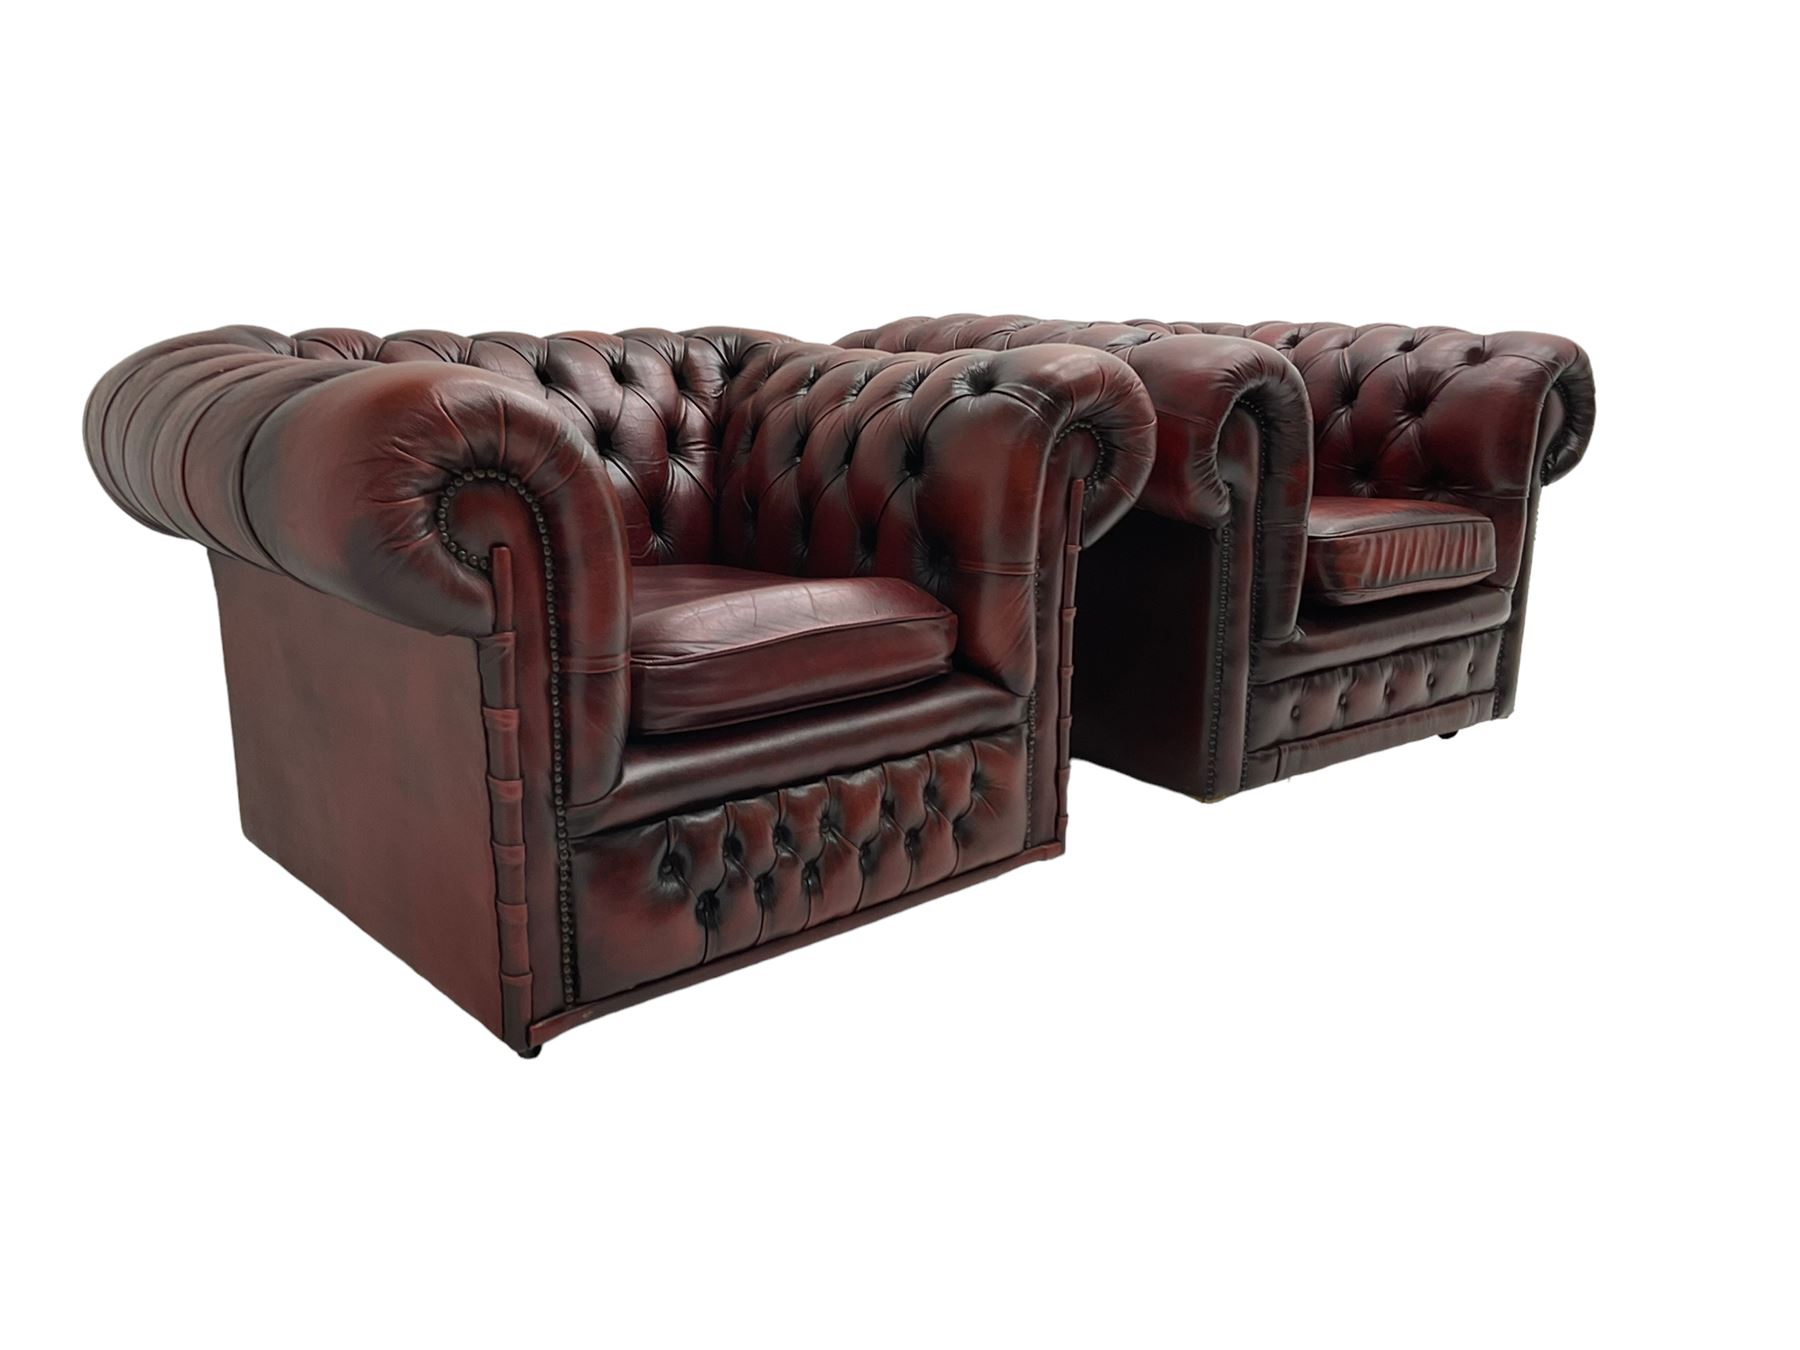 Pair chesterfield armchairs in oxblood leather - Image 2 of 7